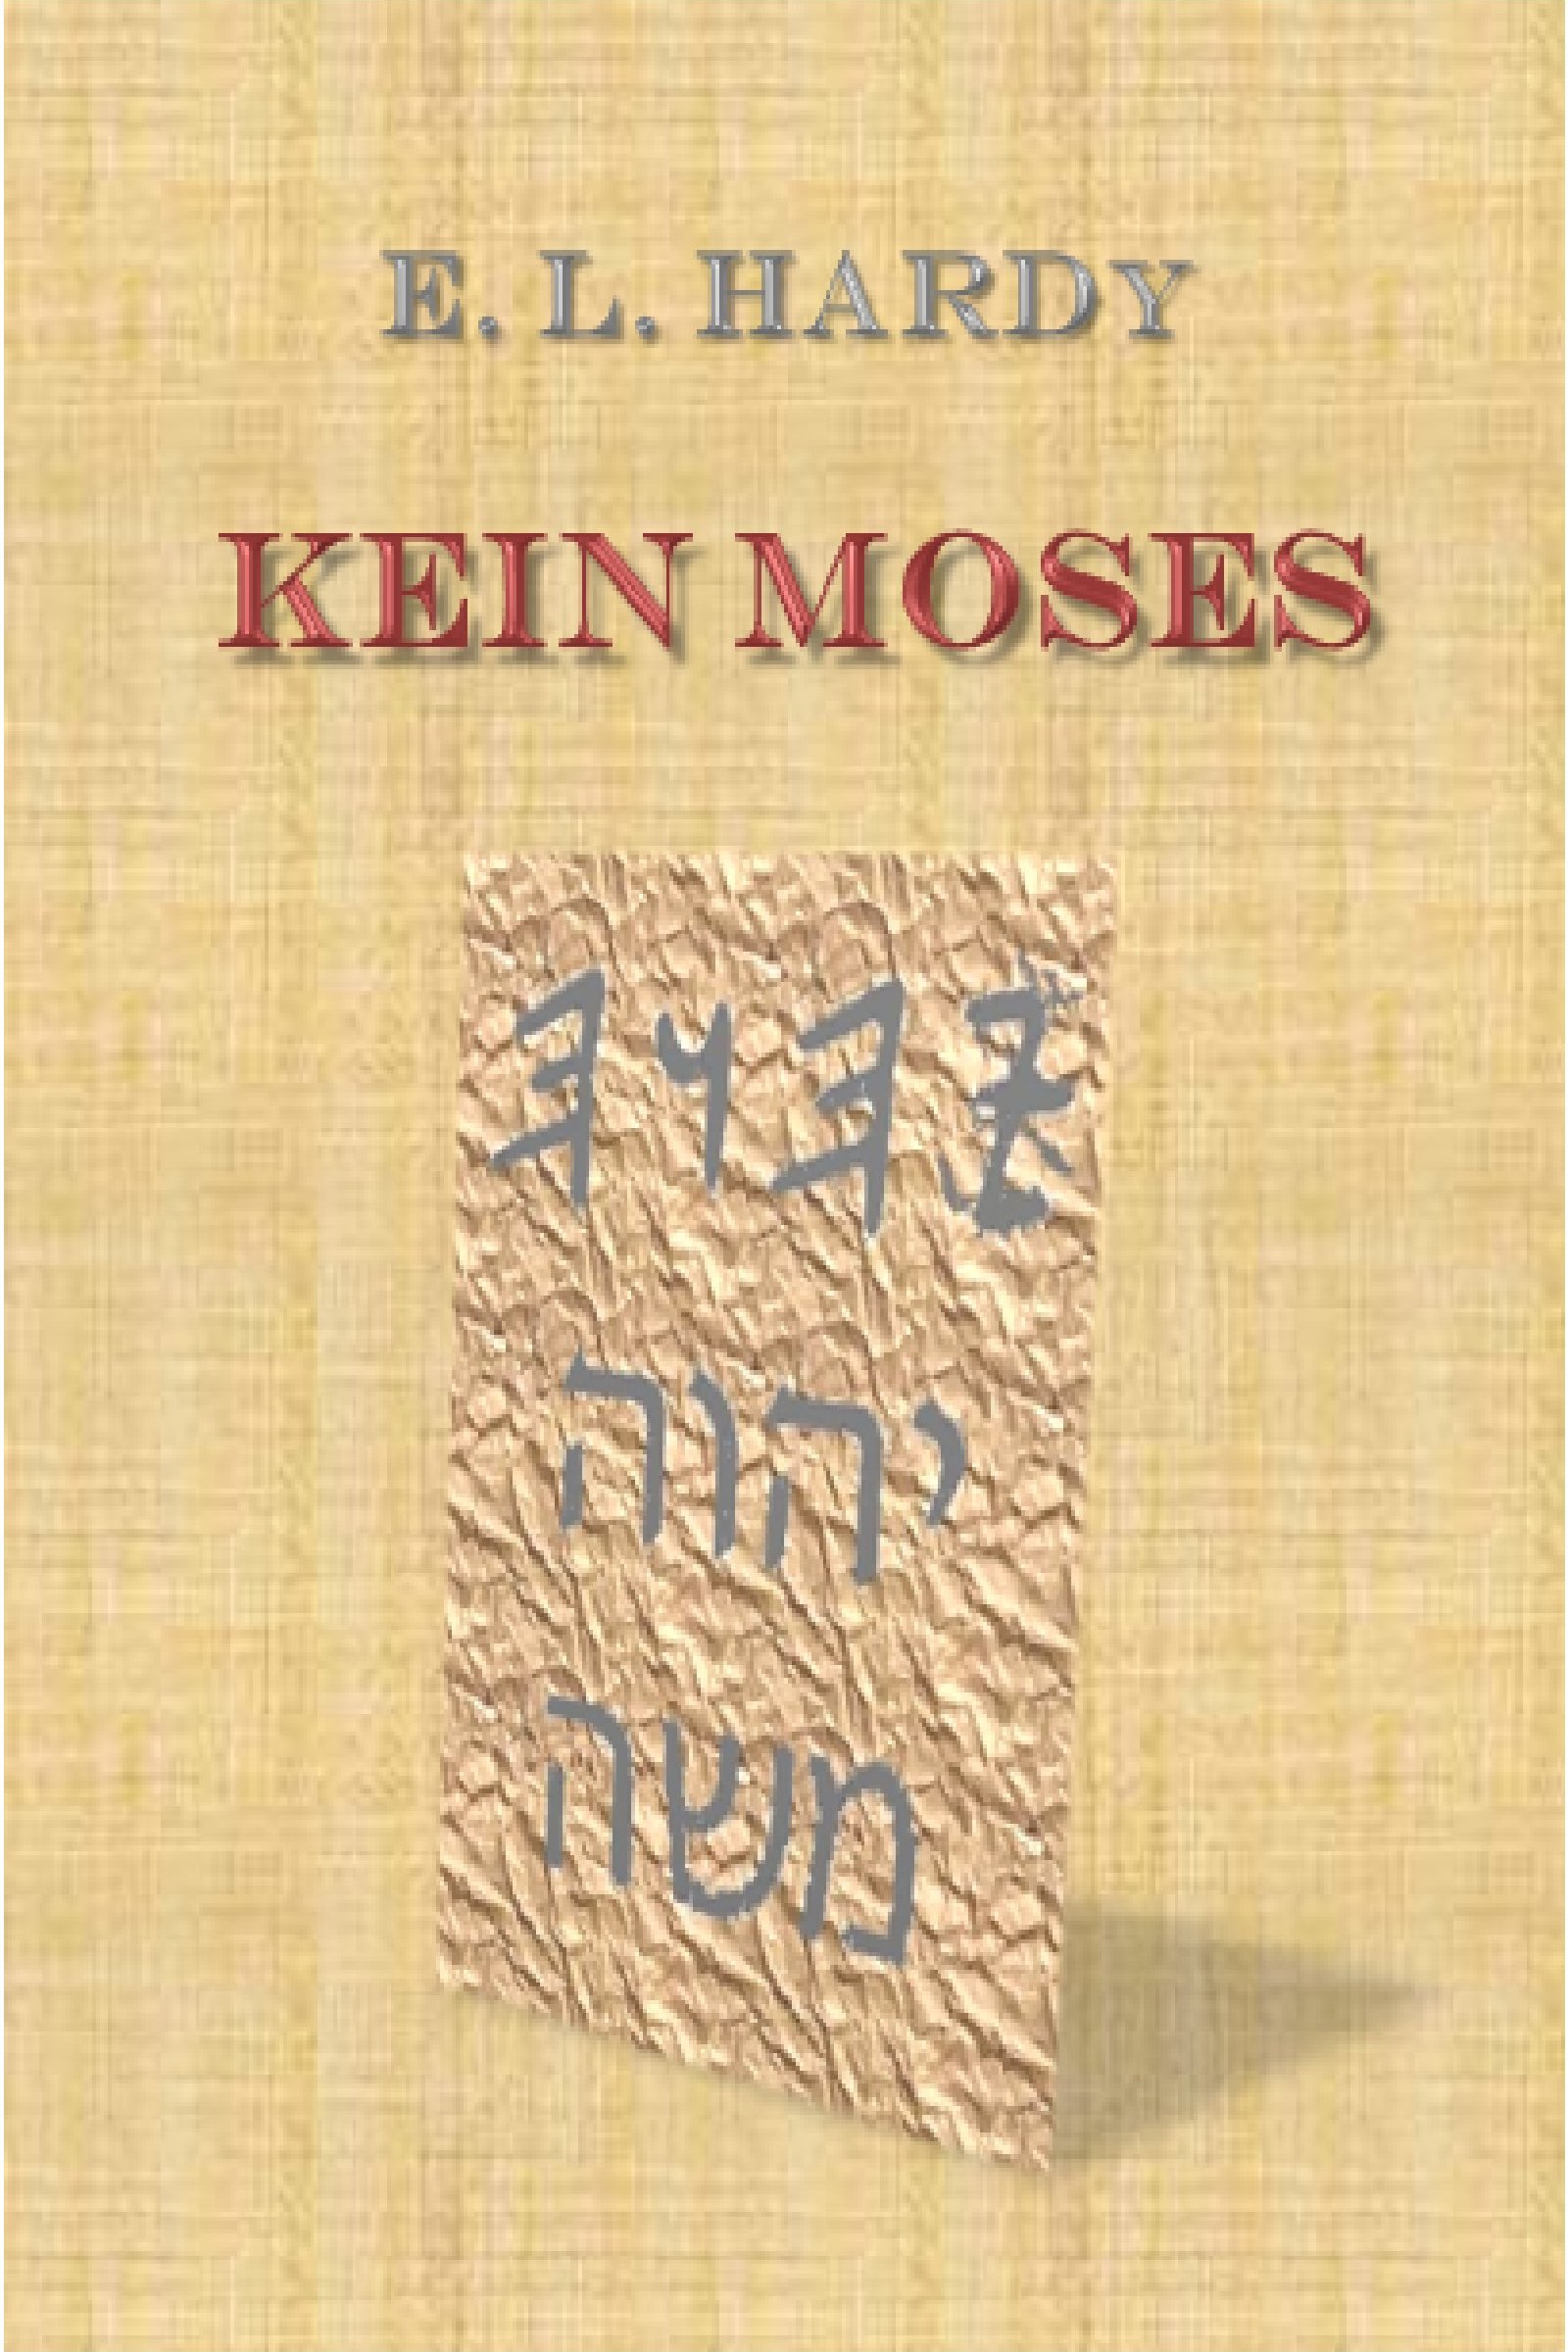 Kein Moses